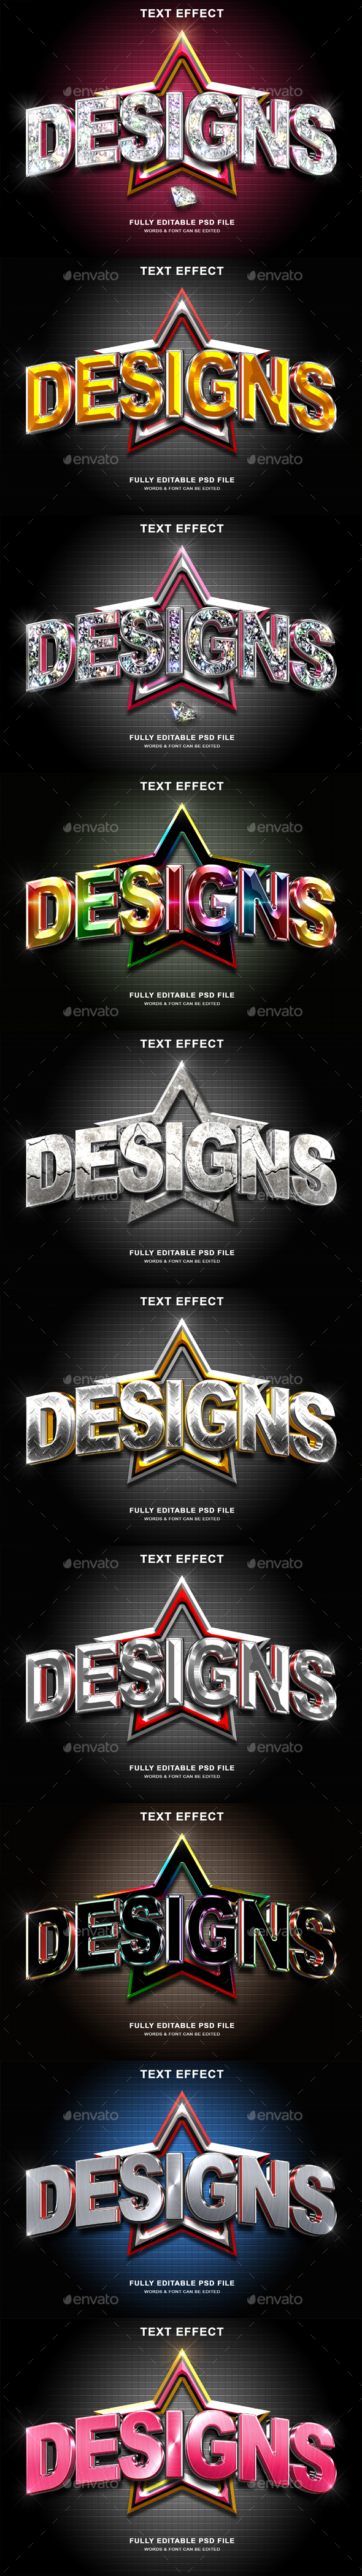 10 Pack 3d Designs Text Style Effects for Photoshop